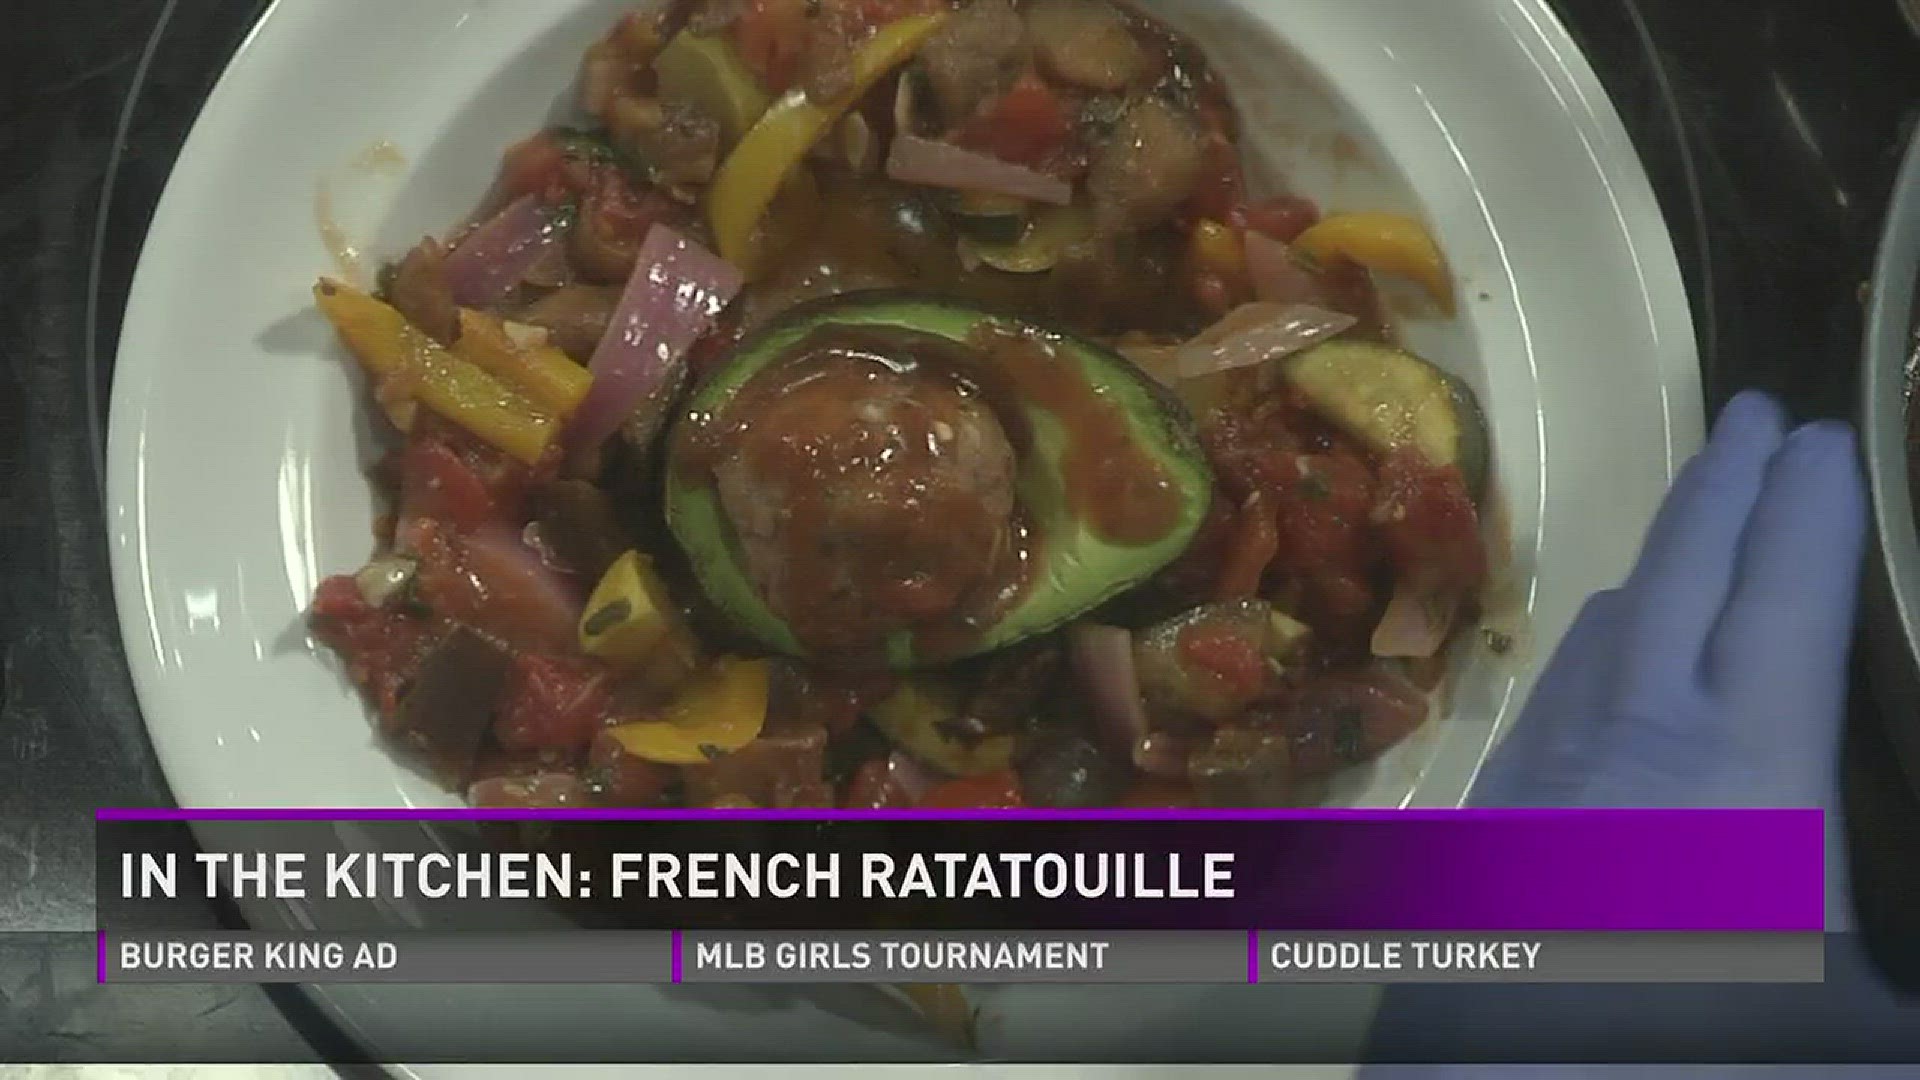 Scott and Michelle Williams from Totality Living Well show how to make French Ratatouille.